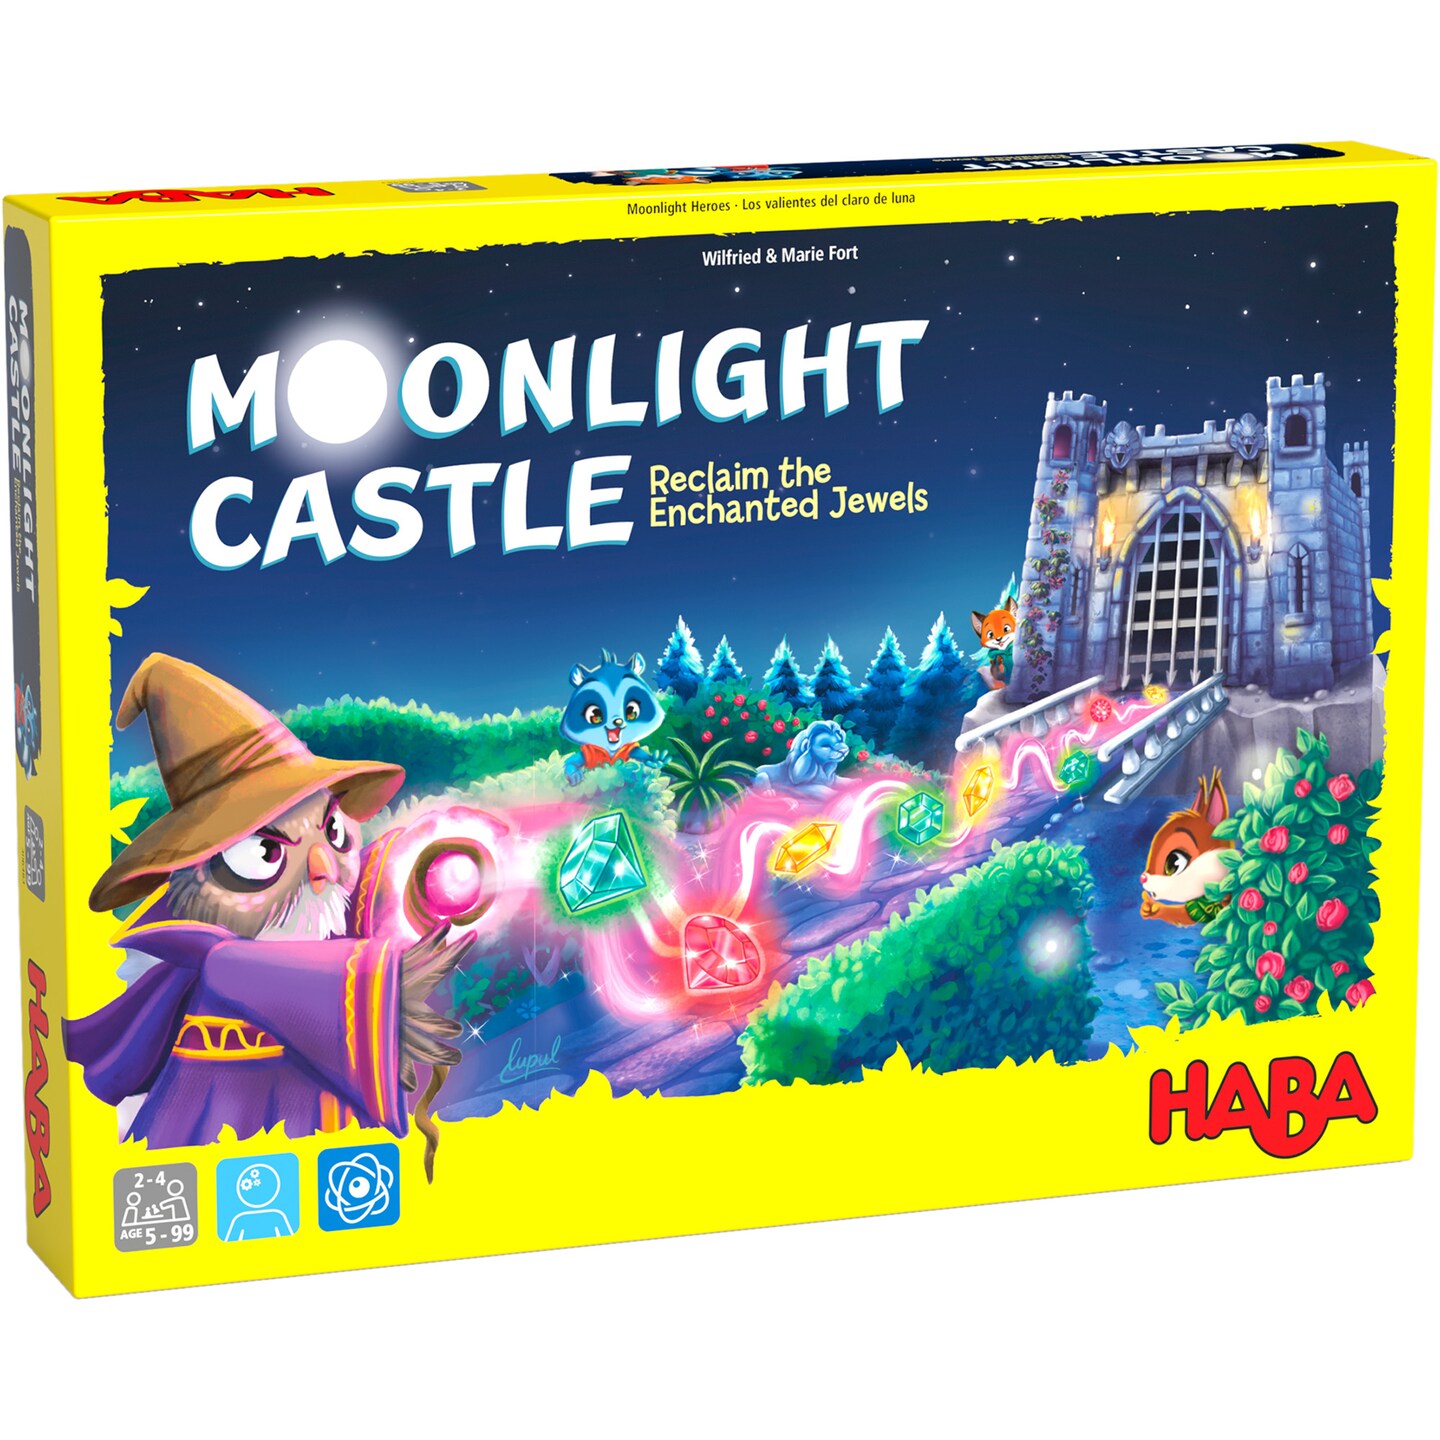 HABA Moonlight Castle - Children&#x27;s Board Game with 3D Castle and Floating Gems